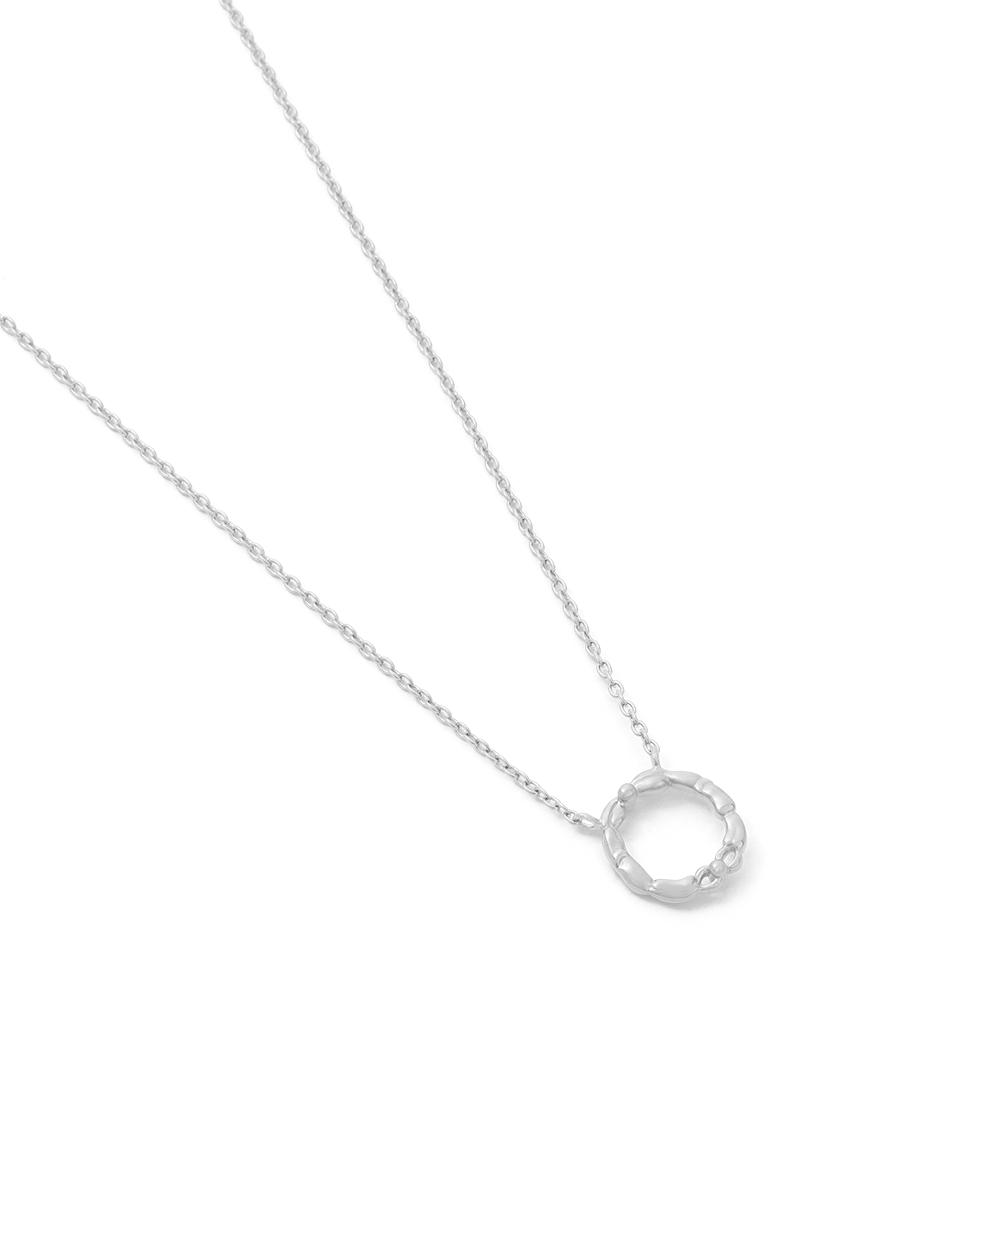 CANCER STAR SIGN NECKLACE (STERLING SILVER)